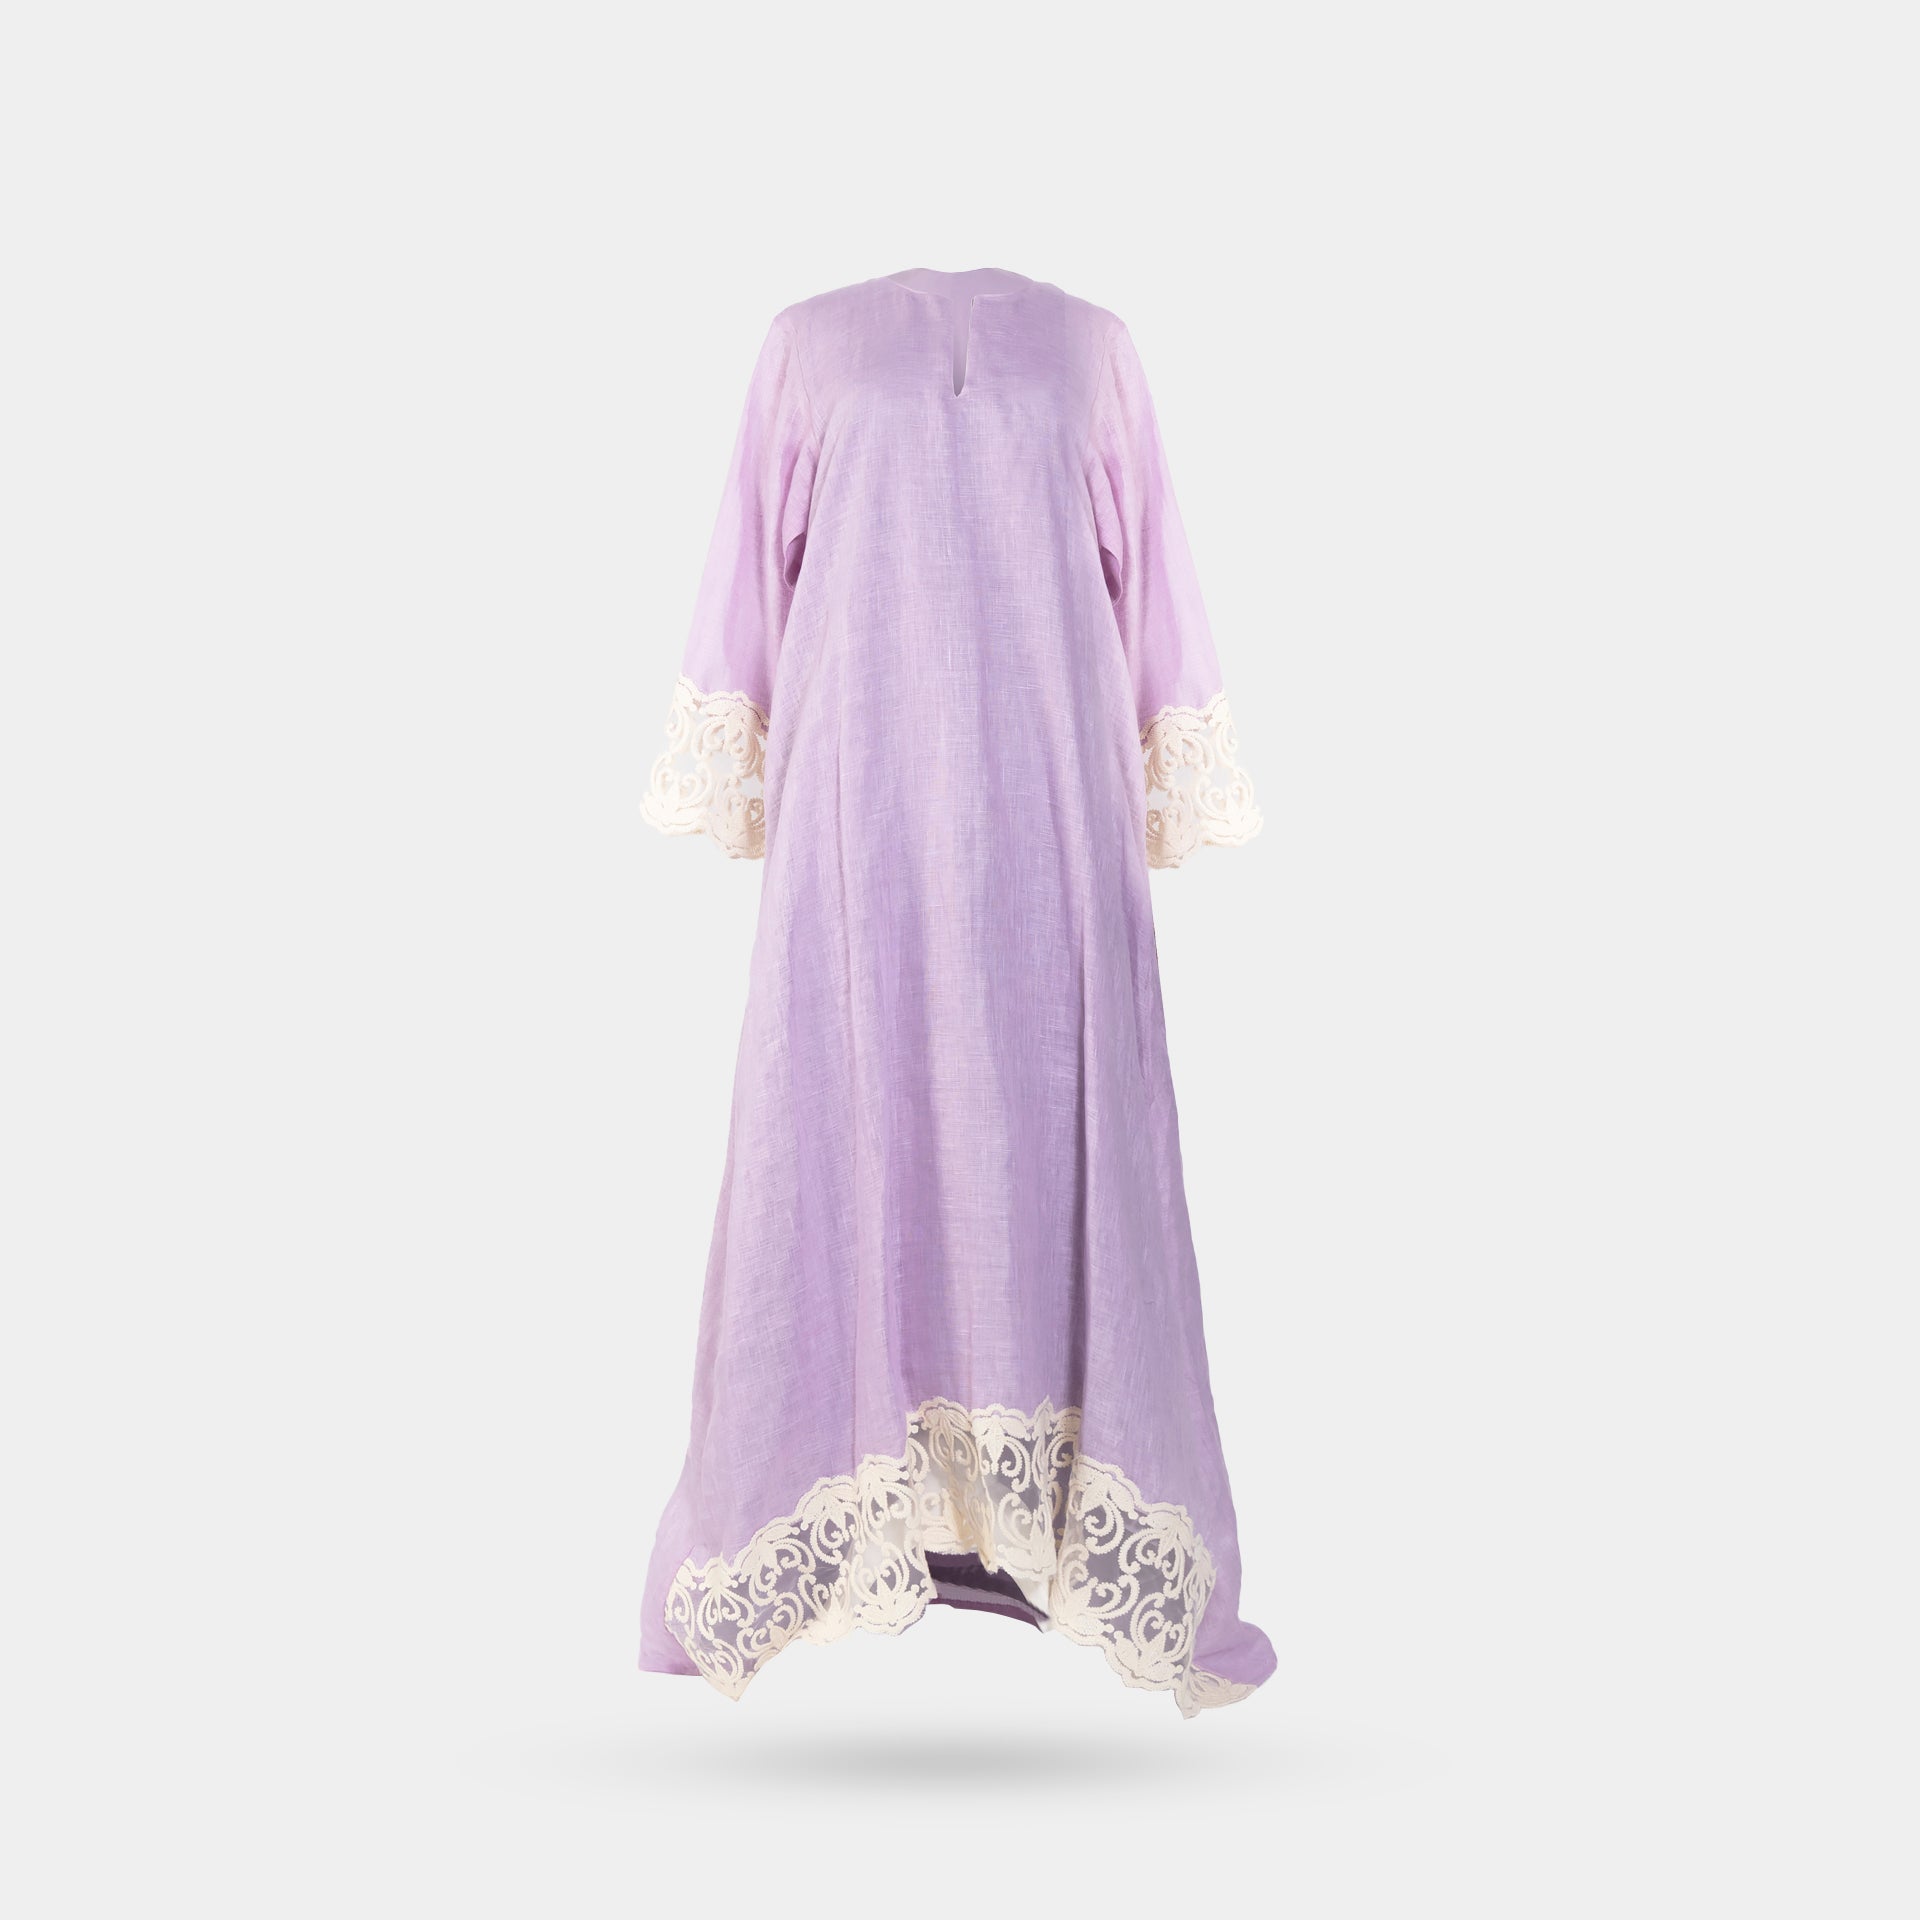 Purple Long Dress with Beige Joubert on the Ends of the Sleeves and Hemline From Darzah